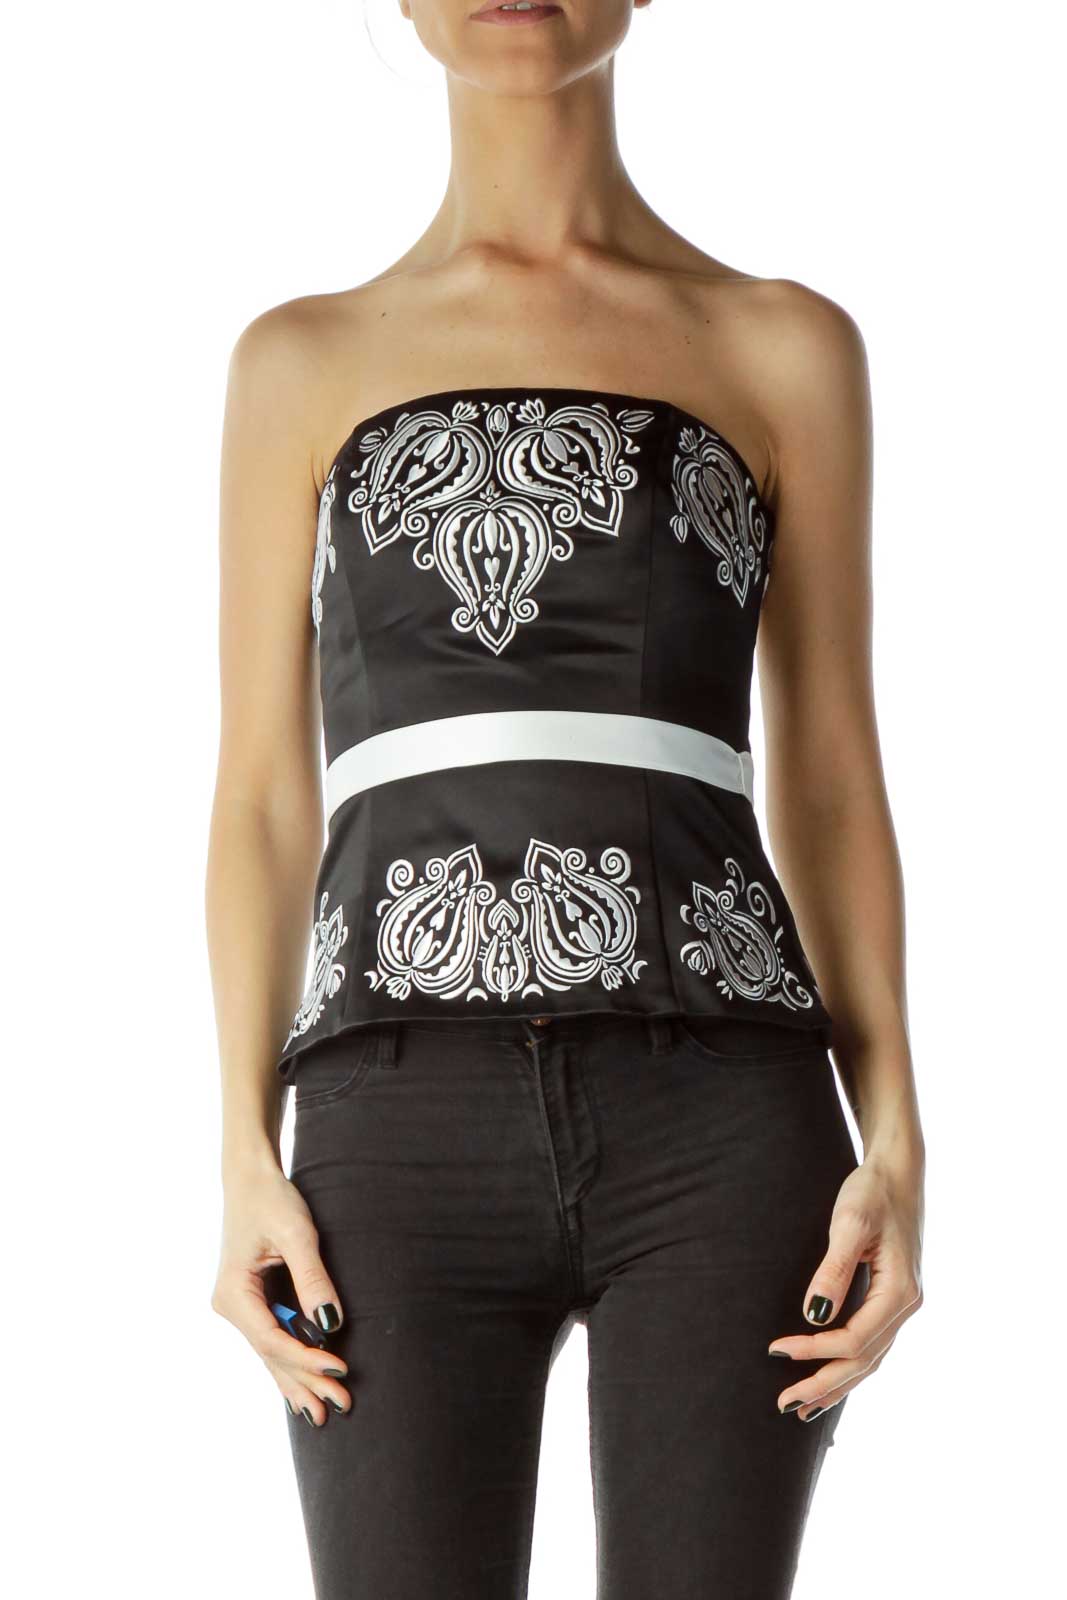 ▷ White House Black Market Womens Embroidered Floral Silk Blend Bustier  Corset 0 - CENTRO COMERCIAL CASTELLANA 200 ◁